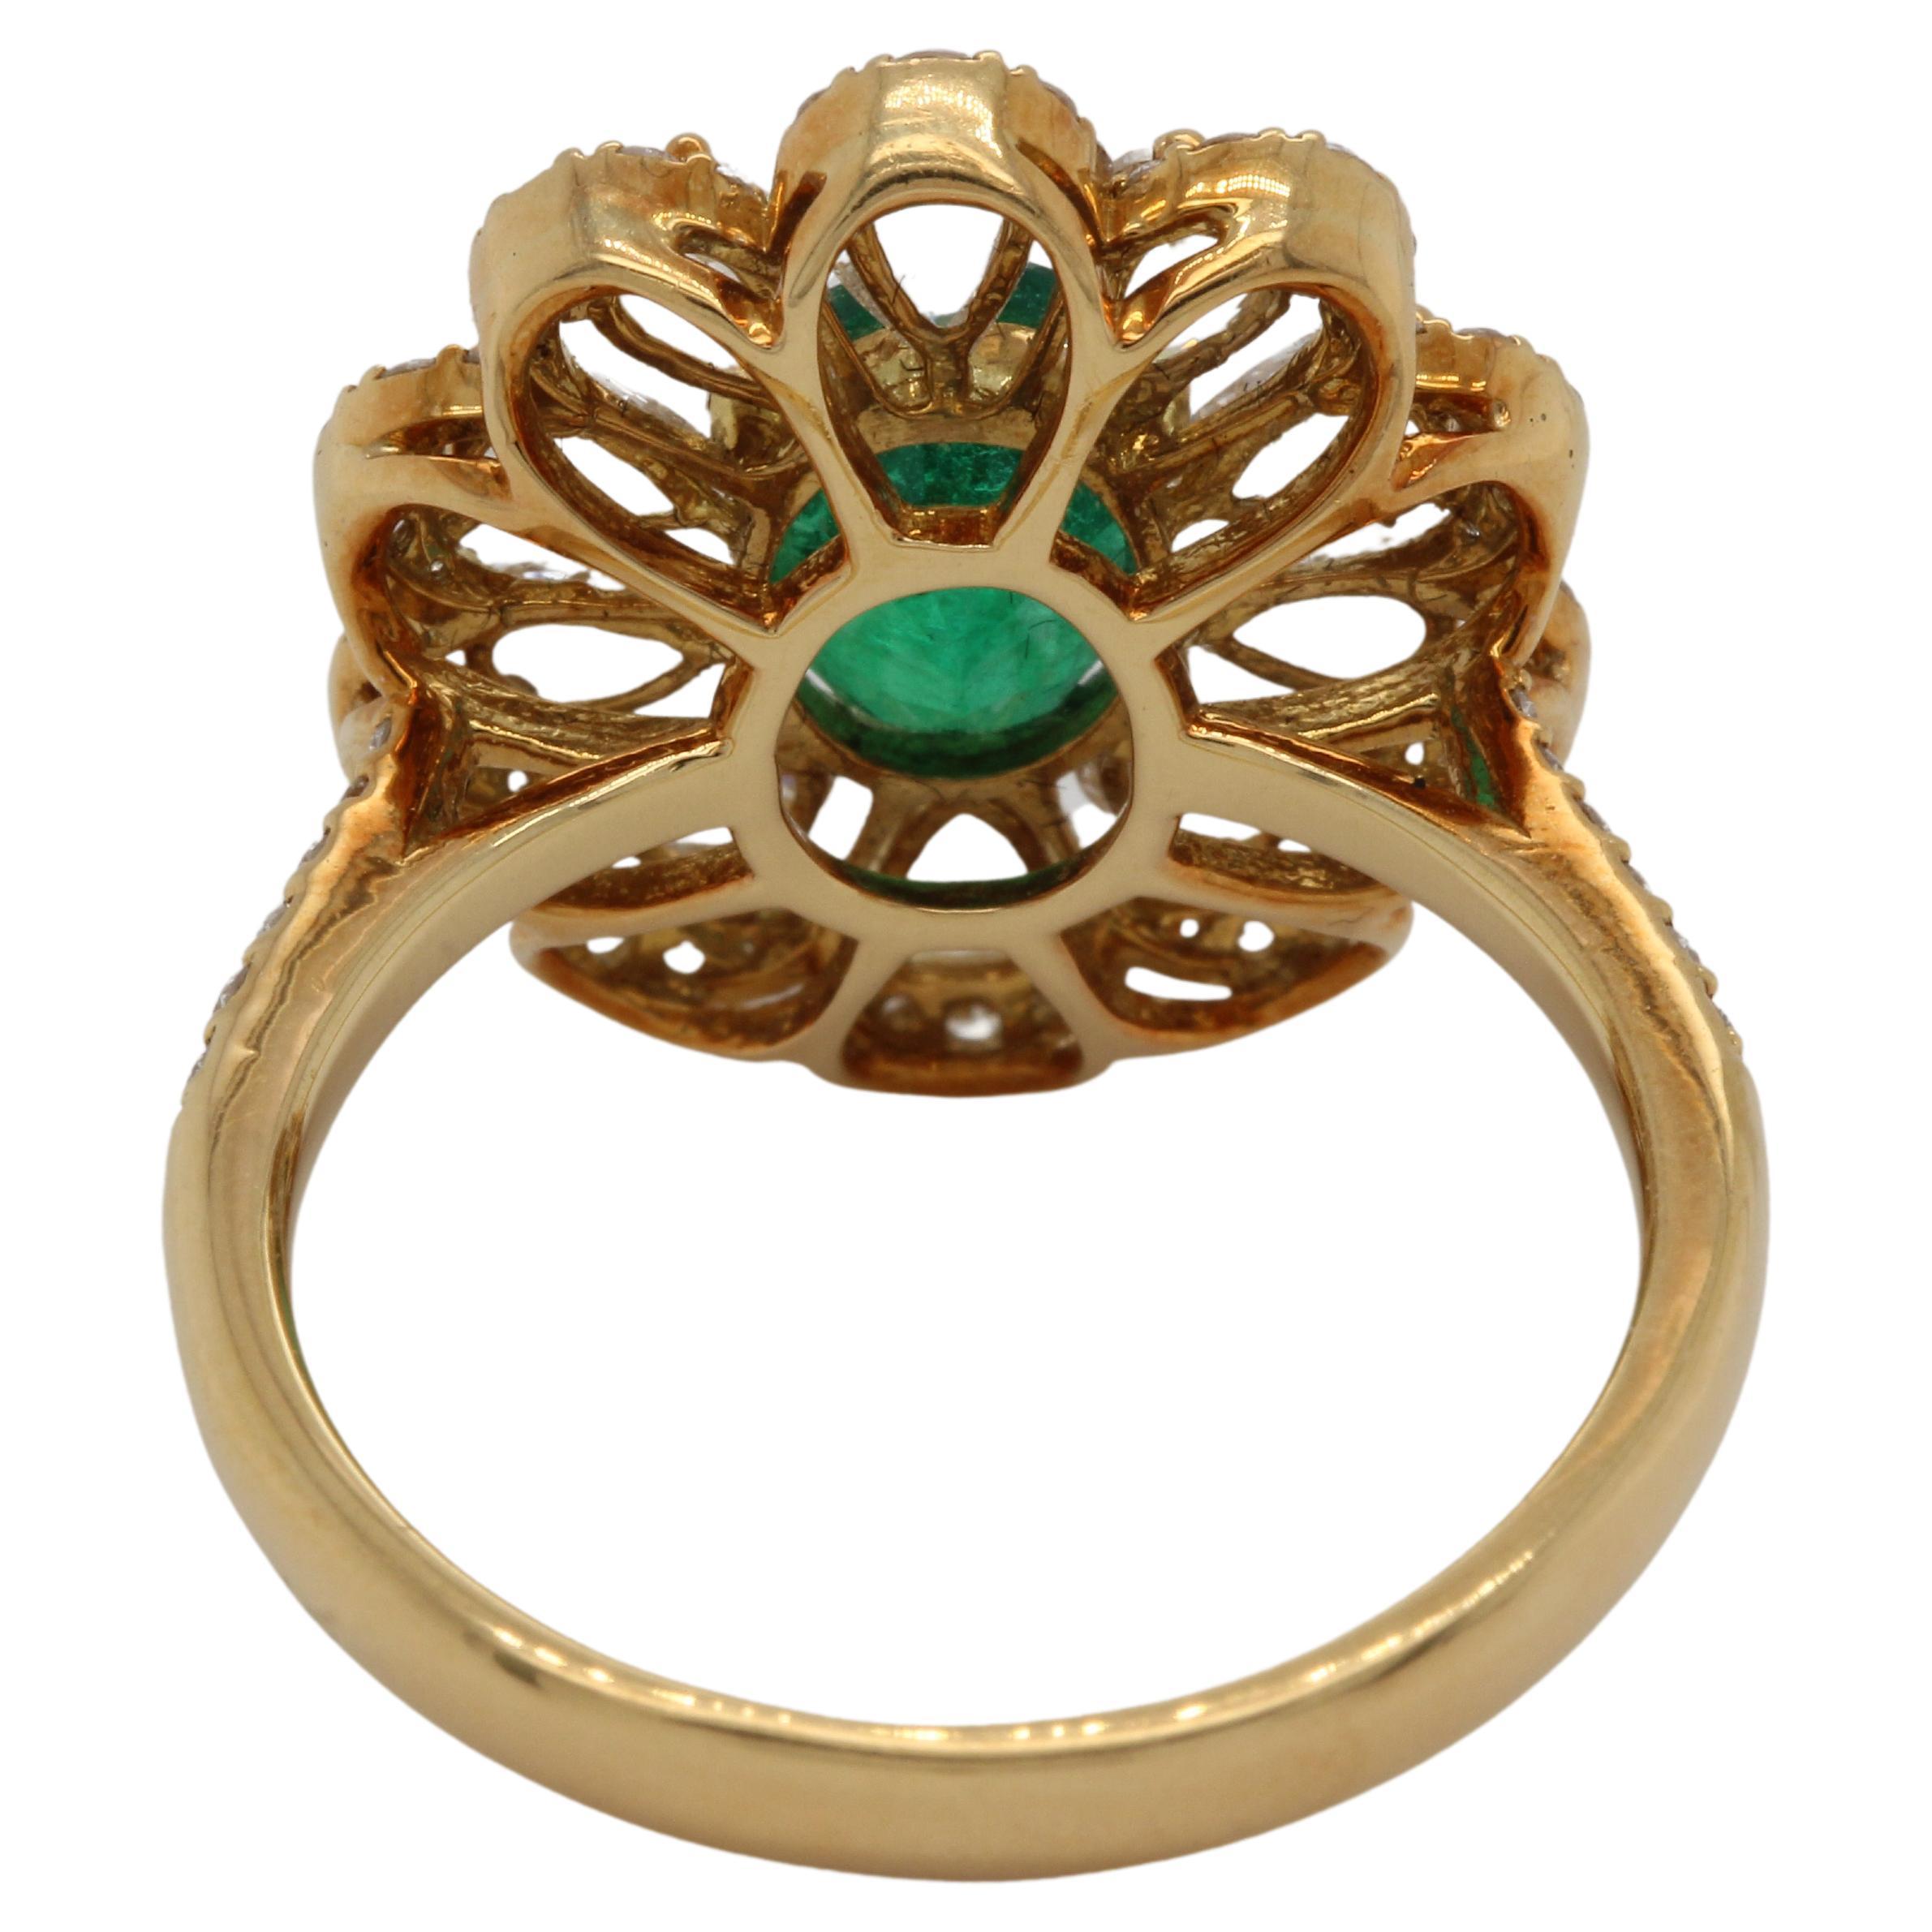 1.38 Carat Emerald and Diamond Ring in 18 Karat Gold For Sale 3